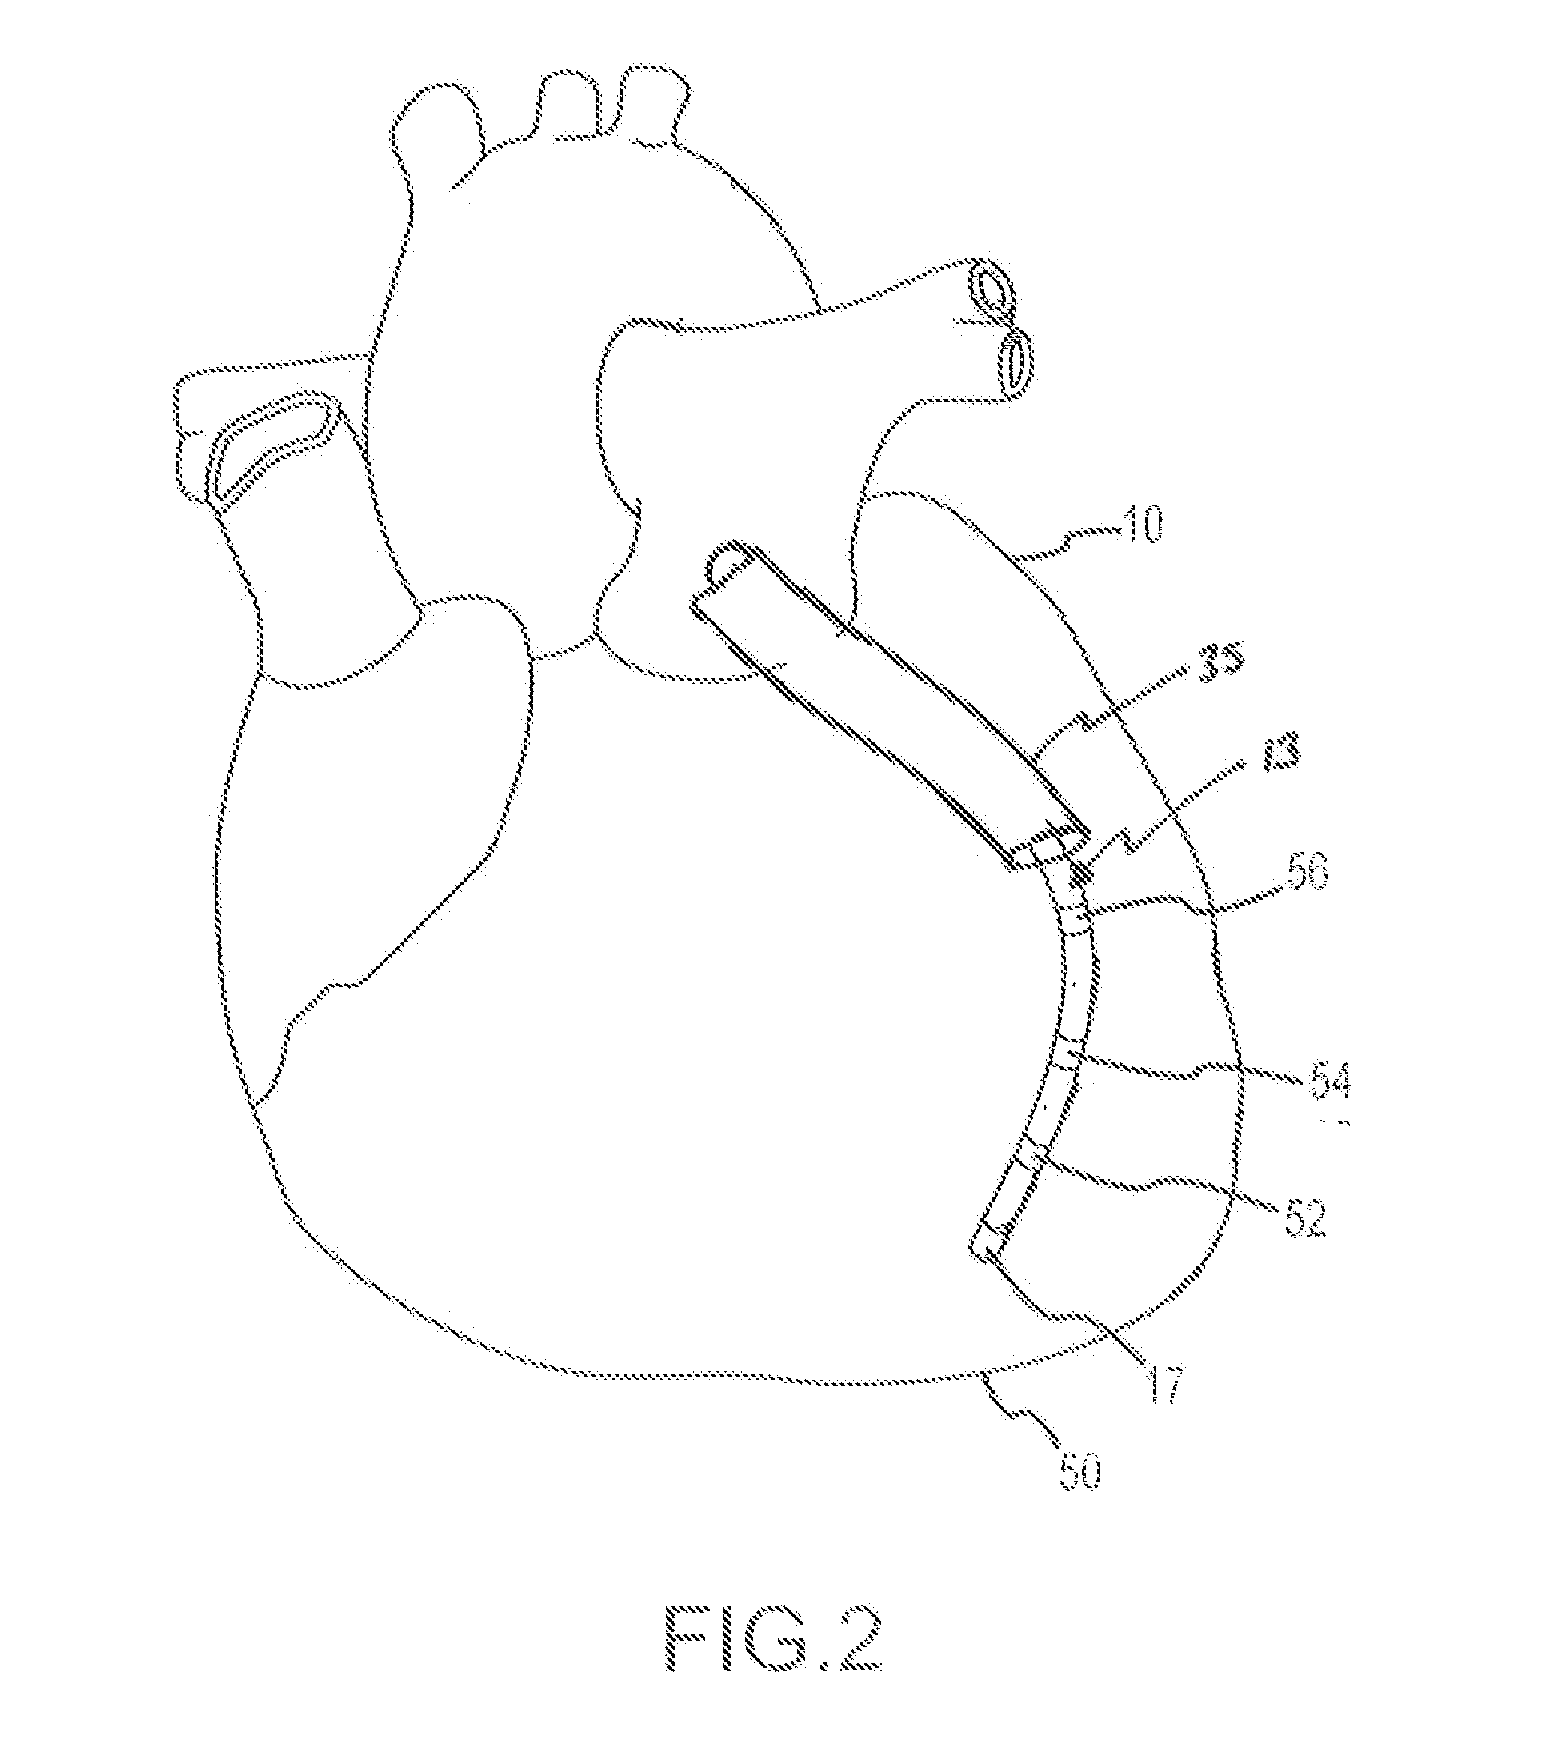 System and Method for Detecting Sheathing and Unsheathing of Localization Elements